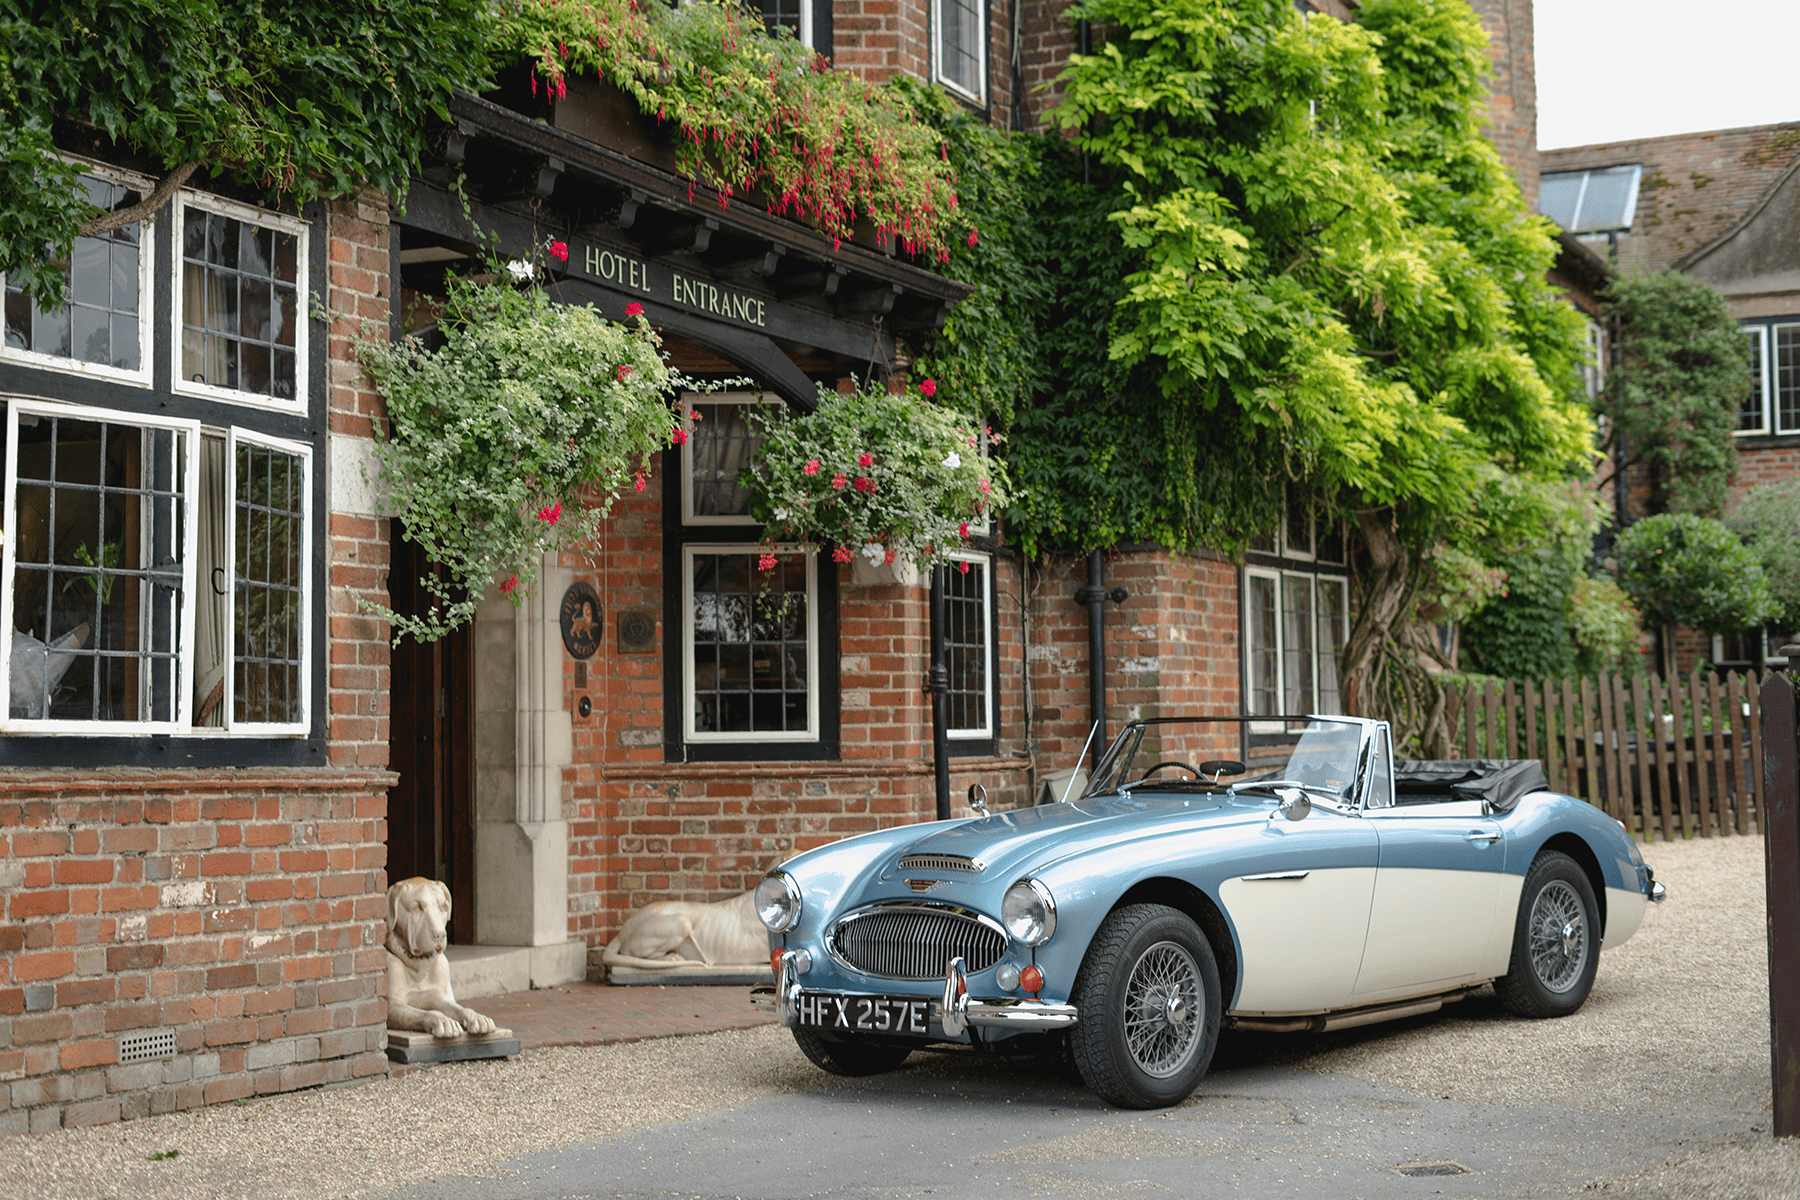 New Forest hotel launches classic car retreats with vintage motors and seven-course meals